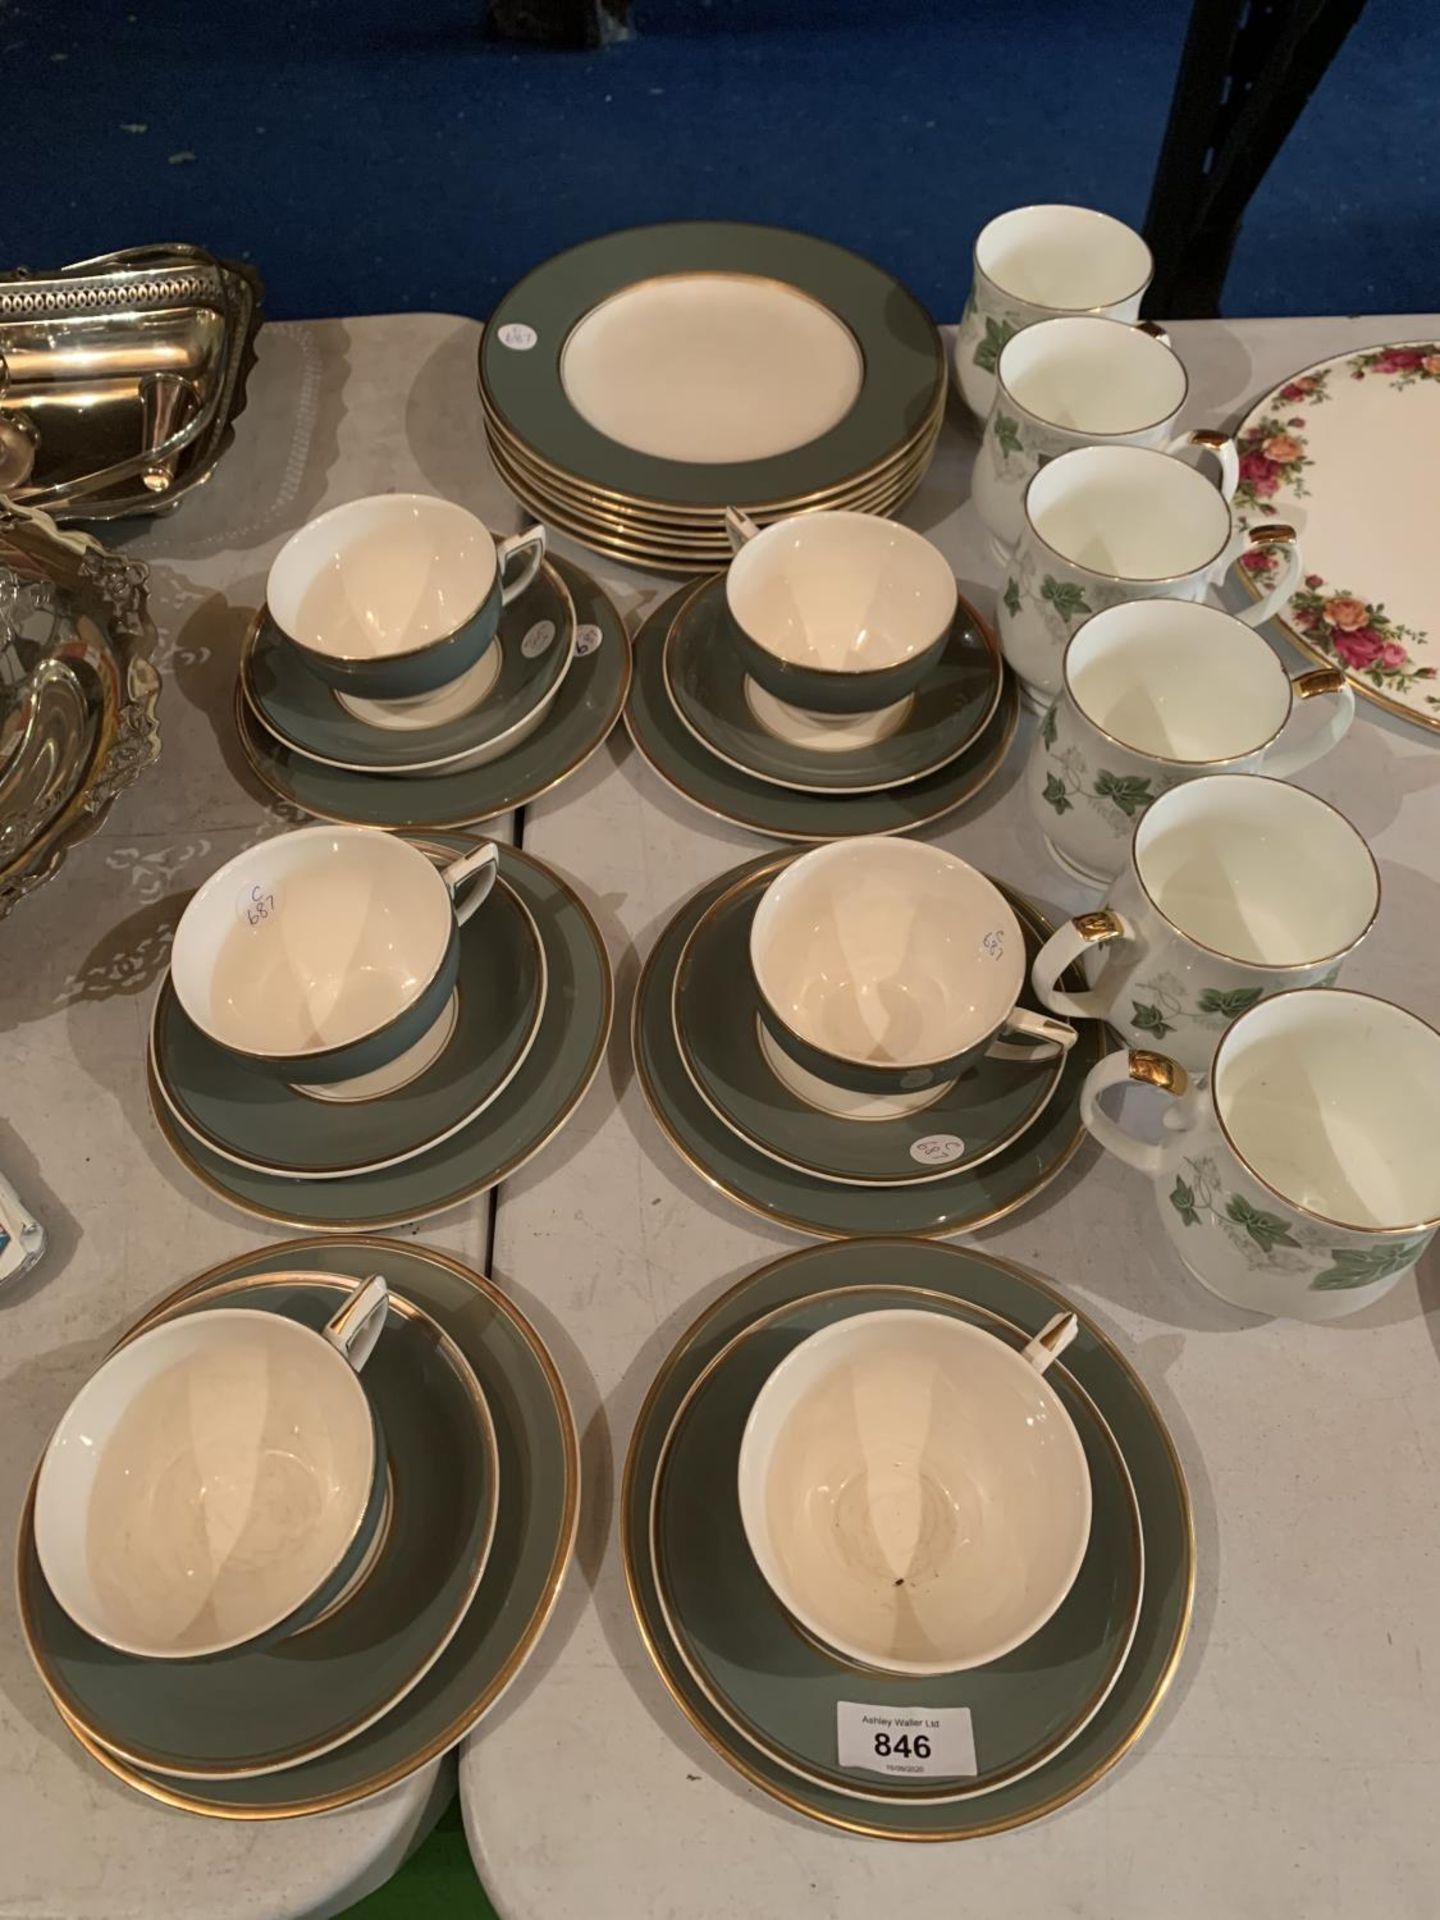 A DUCAL WINDSOR GREEN TEASET WITH SIX CASTLE CHINA MUGS WITH IVY DECORATION